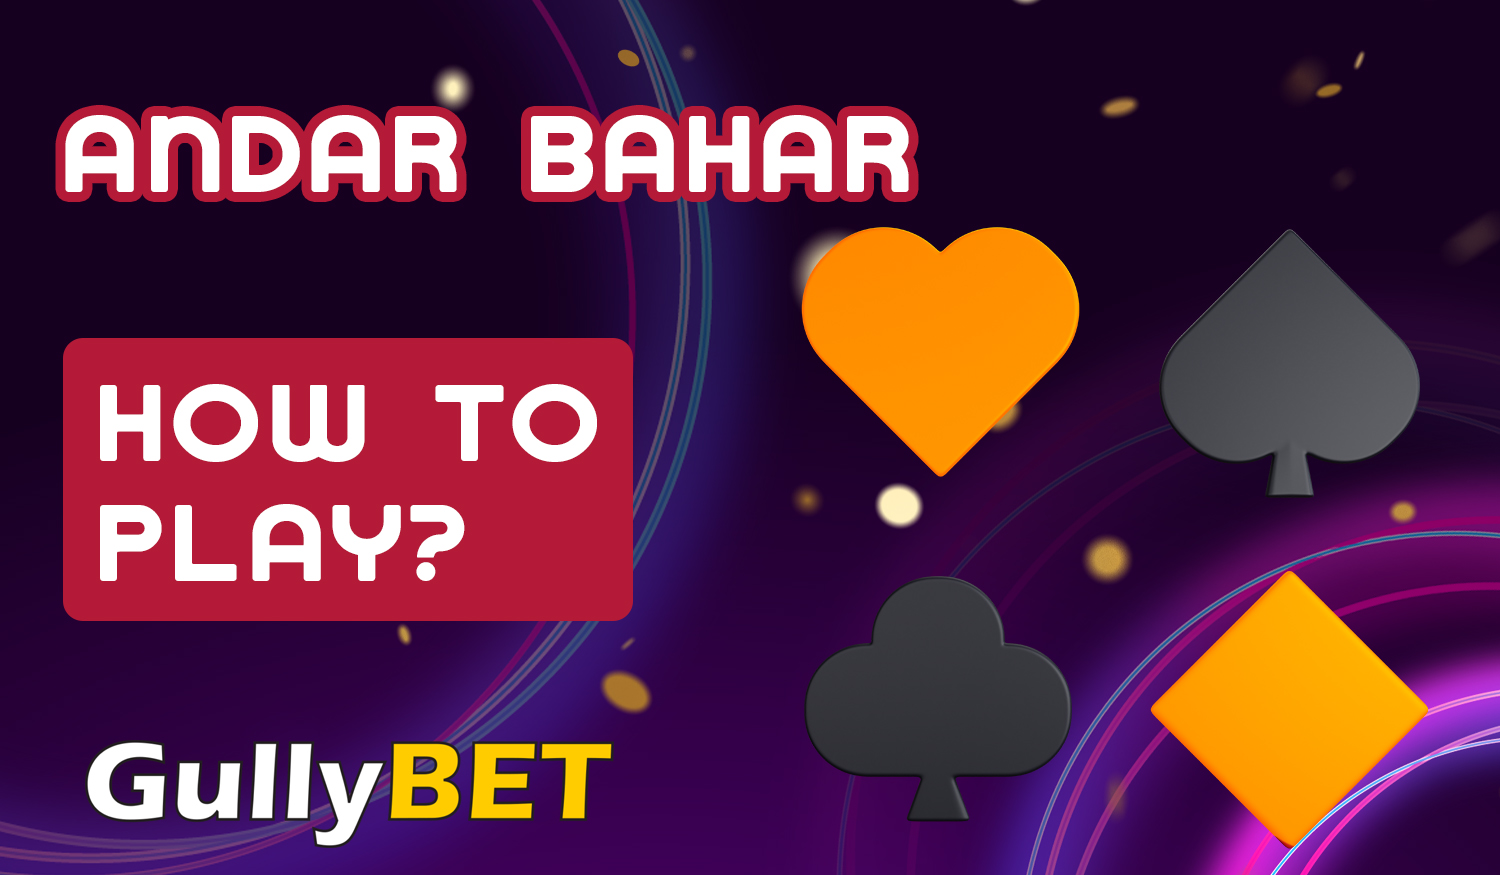 Step by step instructions for Indian users how to start playing Andar Bahar at Gullybet